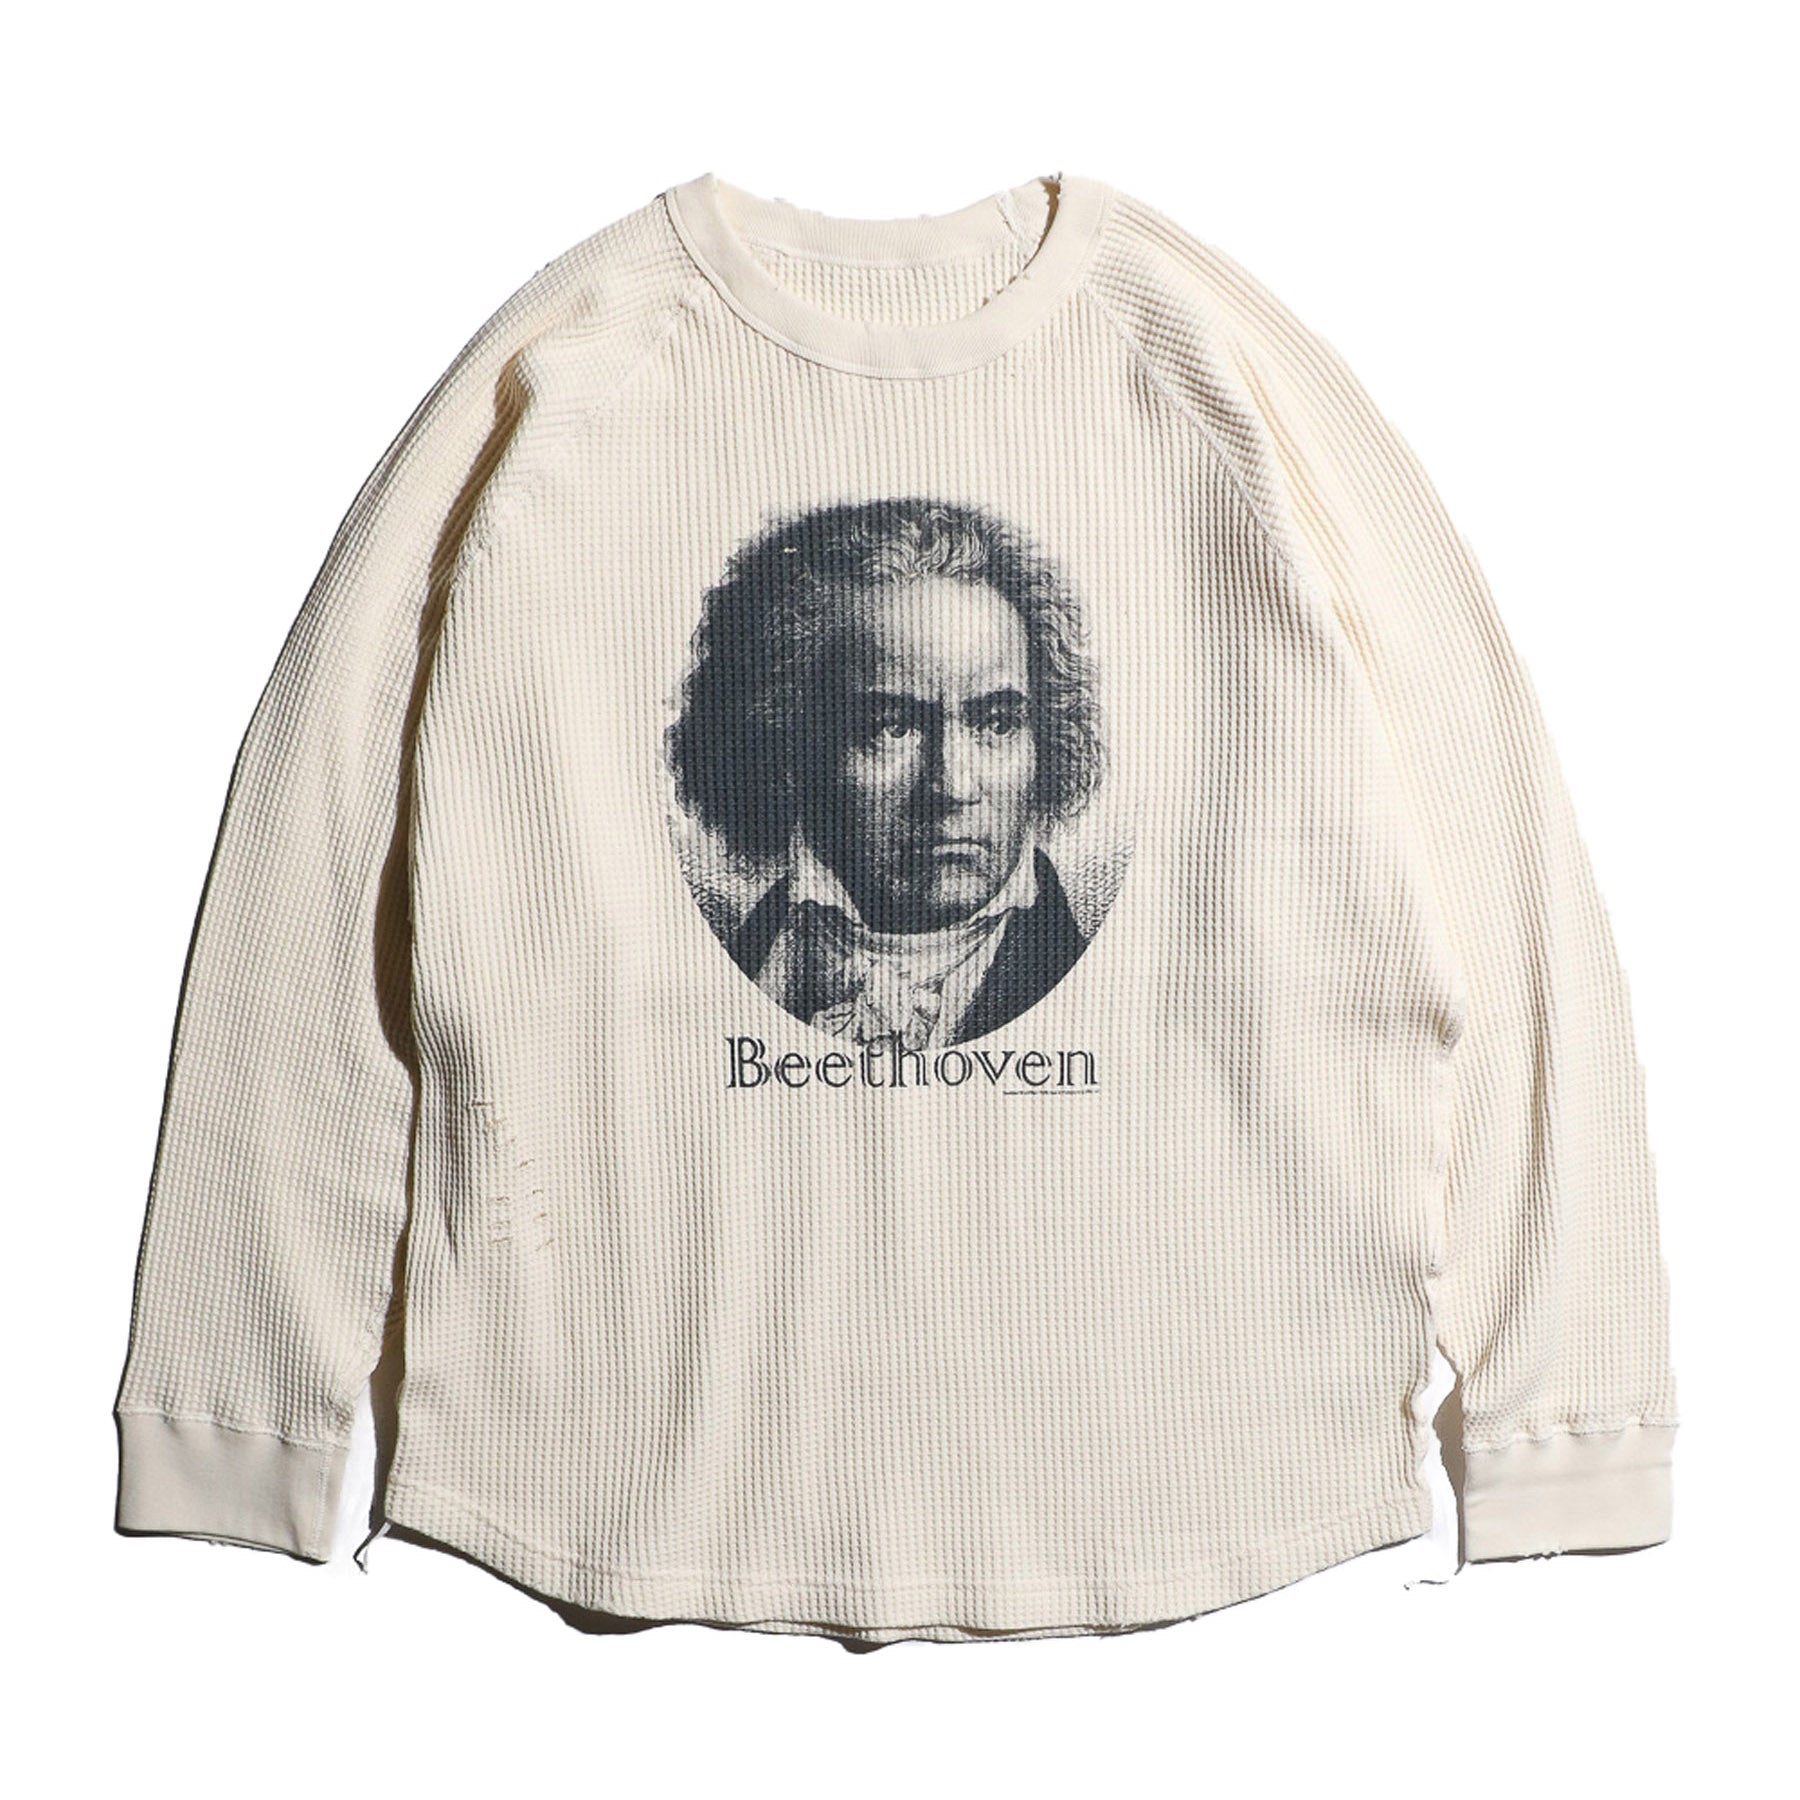 No:tl24f014_WHITE | Name:beethoven 2/3sleeve waffle ls | Color:White【THRIFTY LOOK_スリフティールック】【入荷予定アイテム・入荷連絡可能】